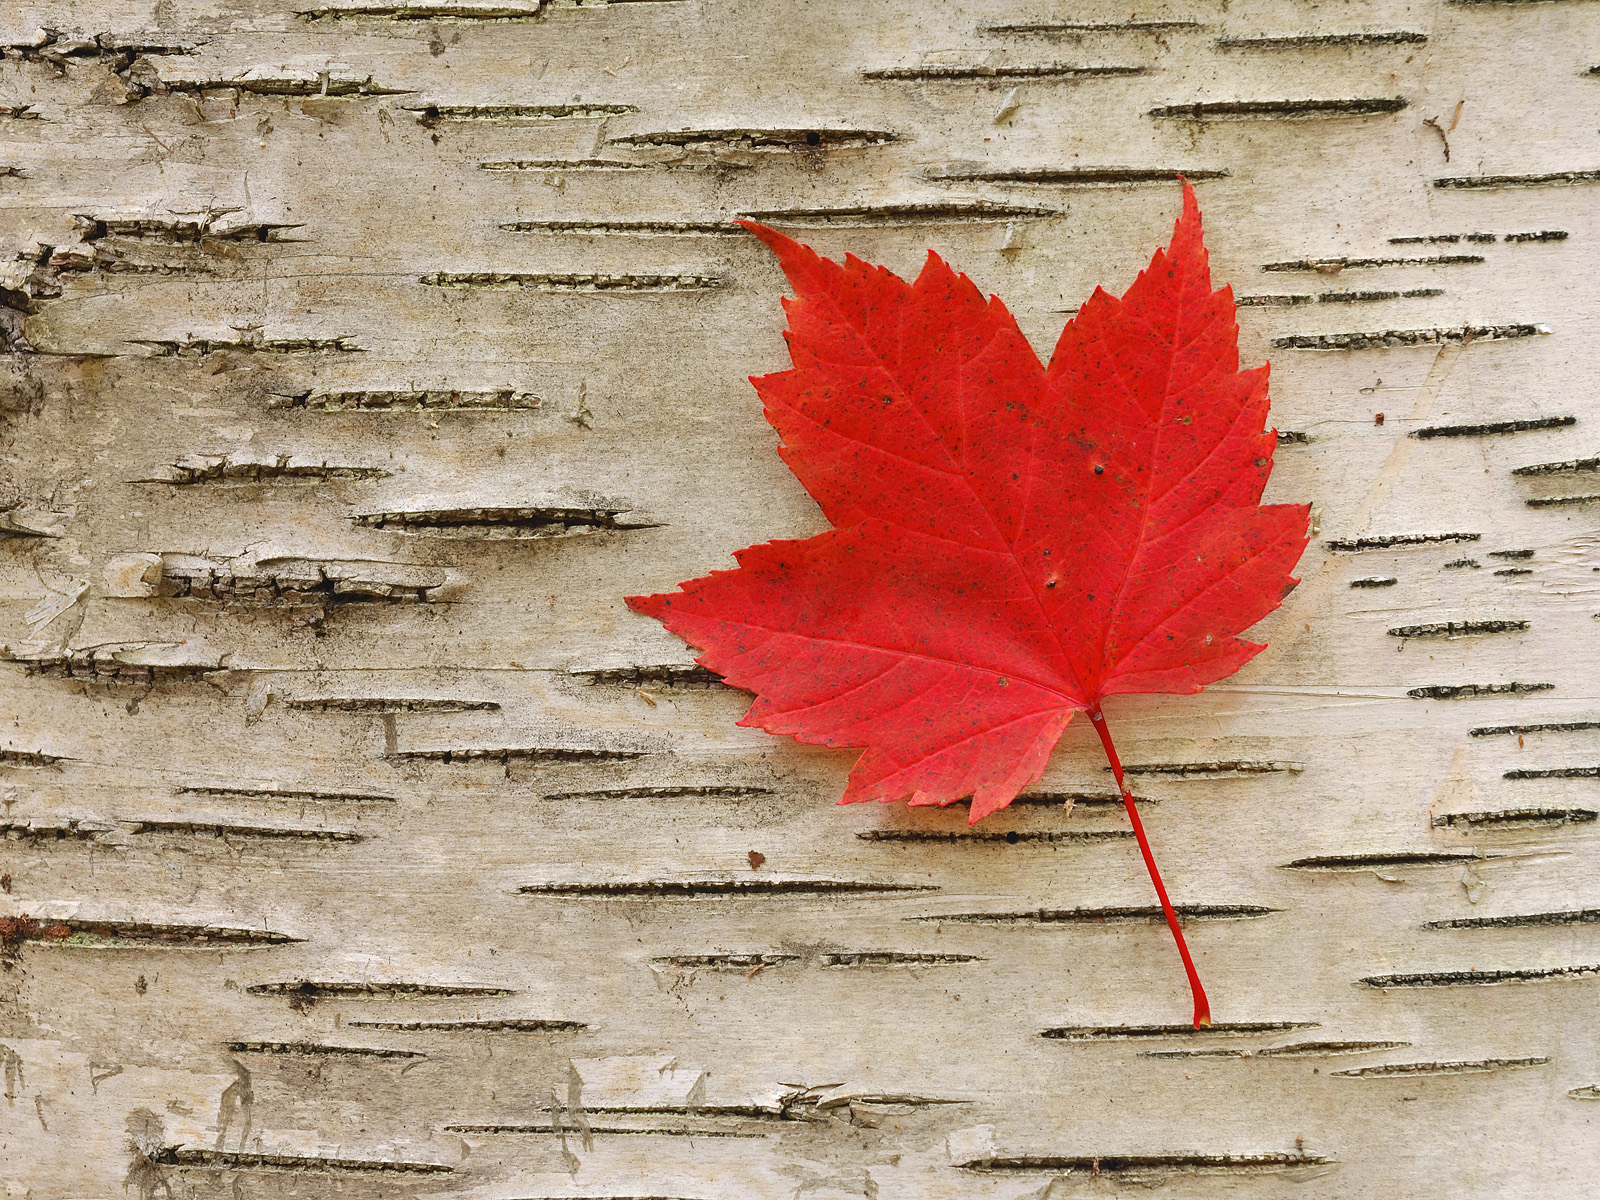 Maple Leaf Image - Wallpaper, High Definition, High Quality, Widescreen